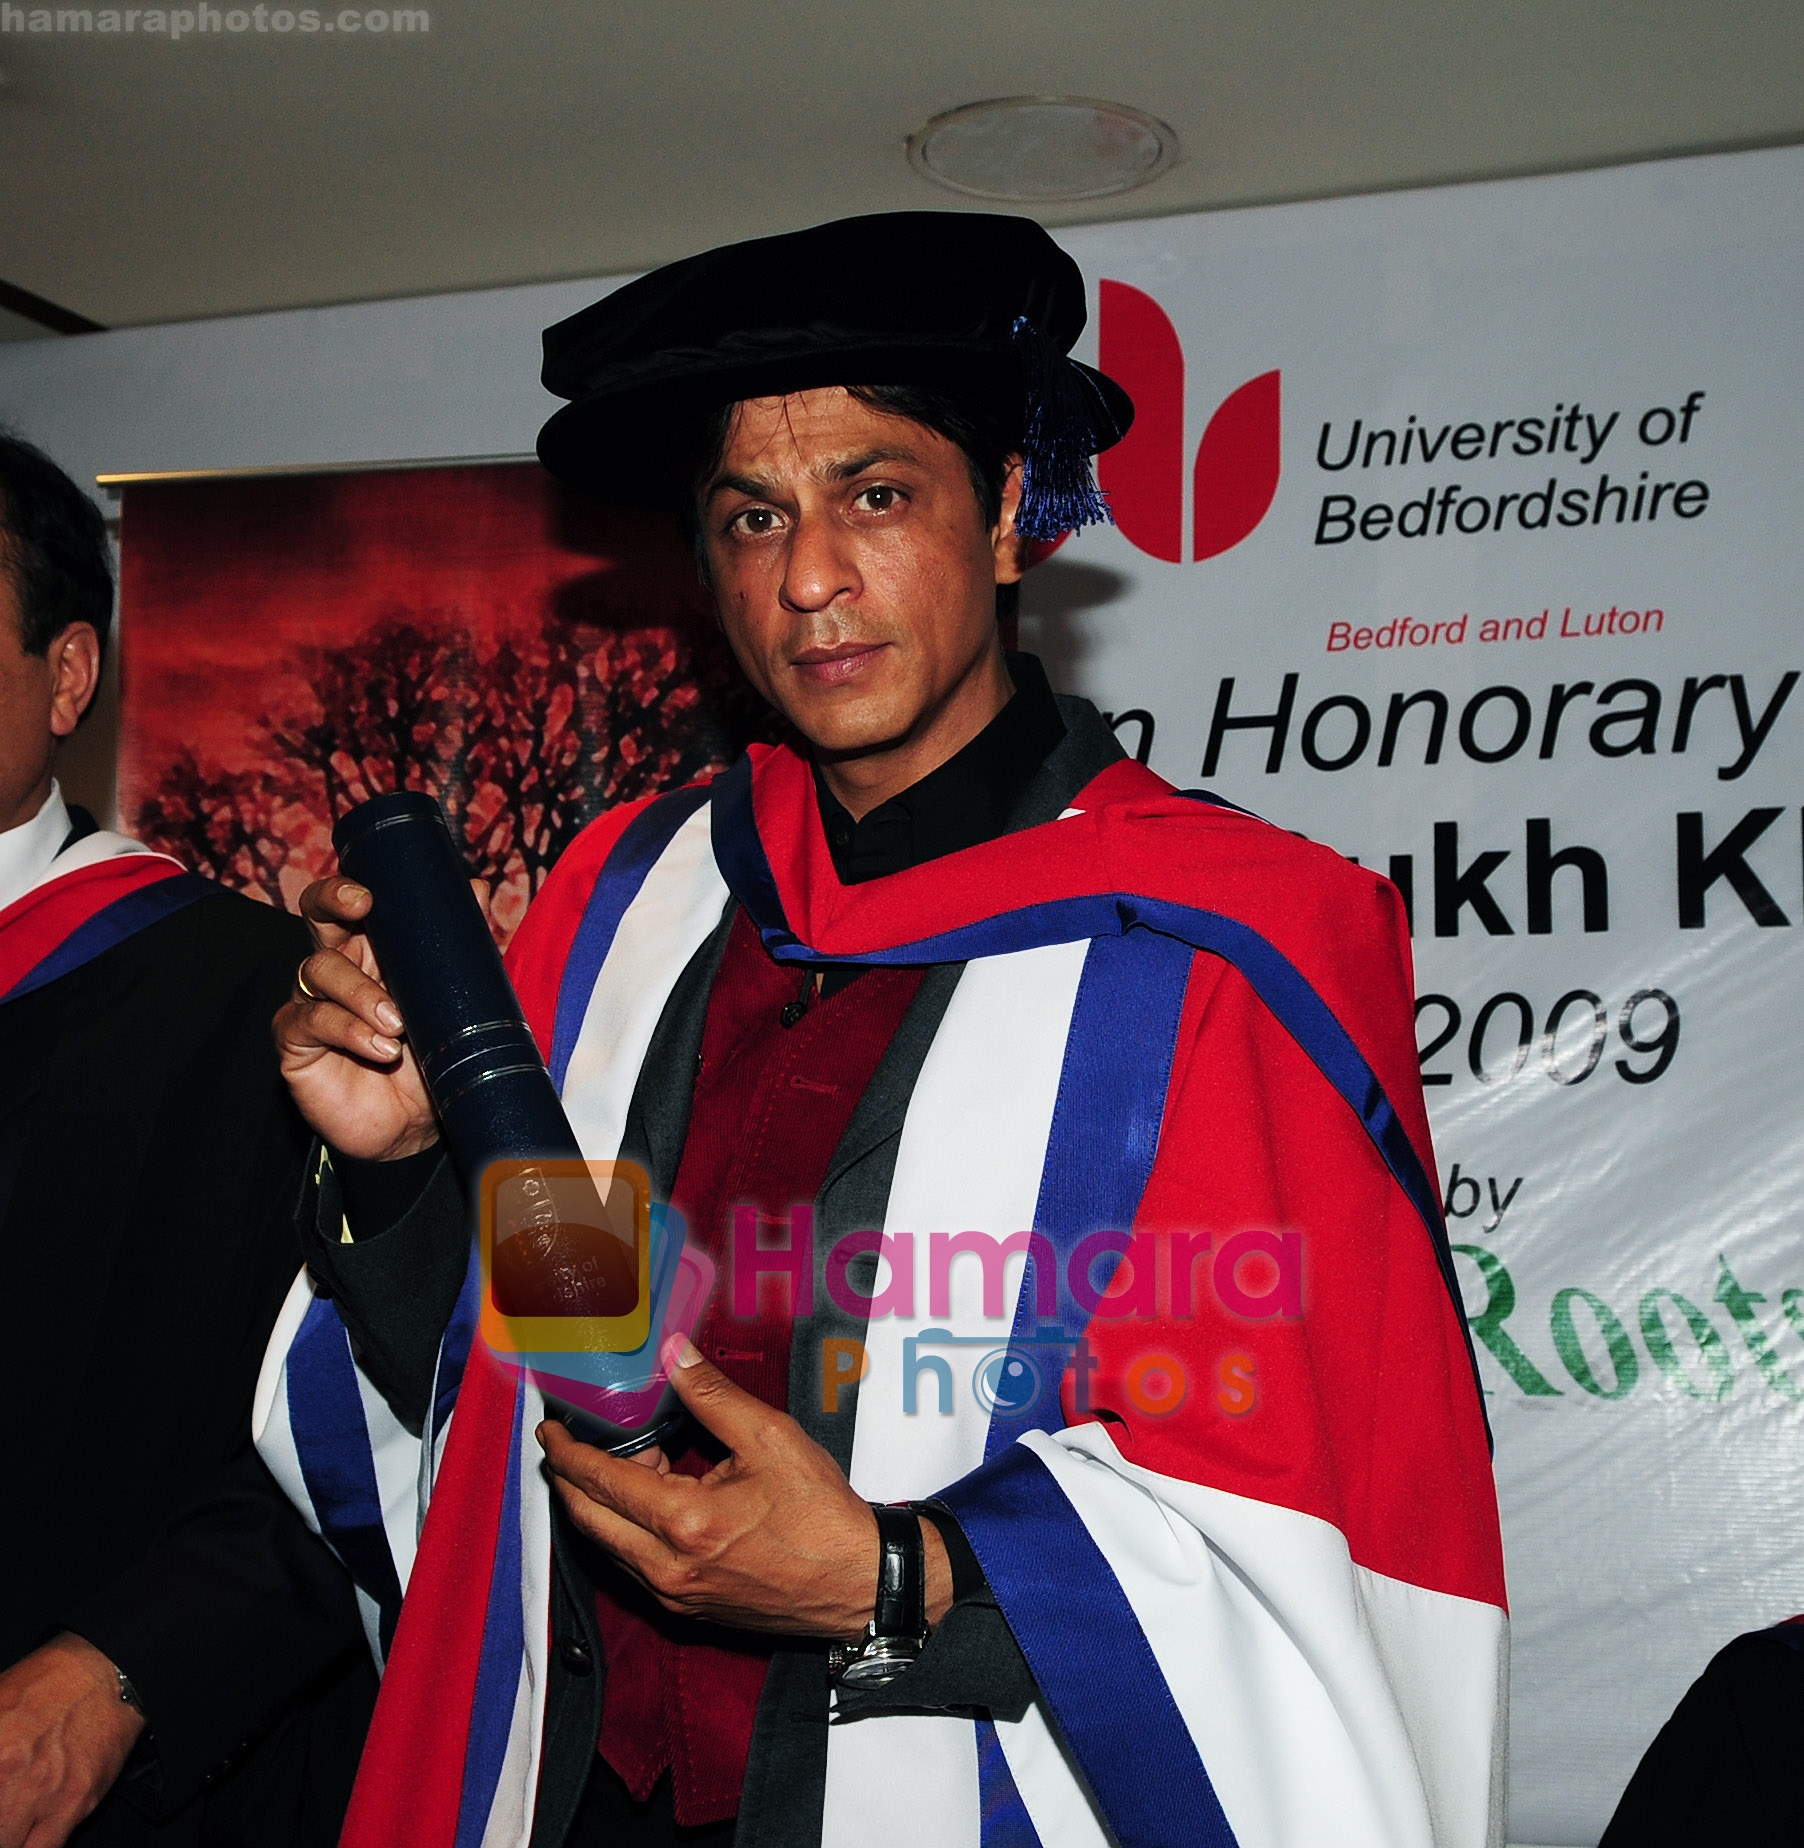 Shah Rukh Shah with his honorary doctorate in University of Bedfordshire on 10th July 2009  